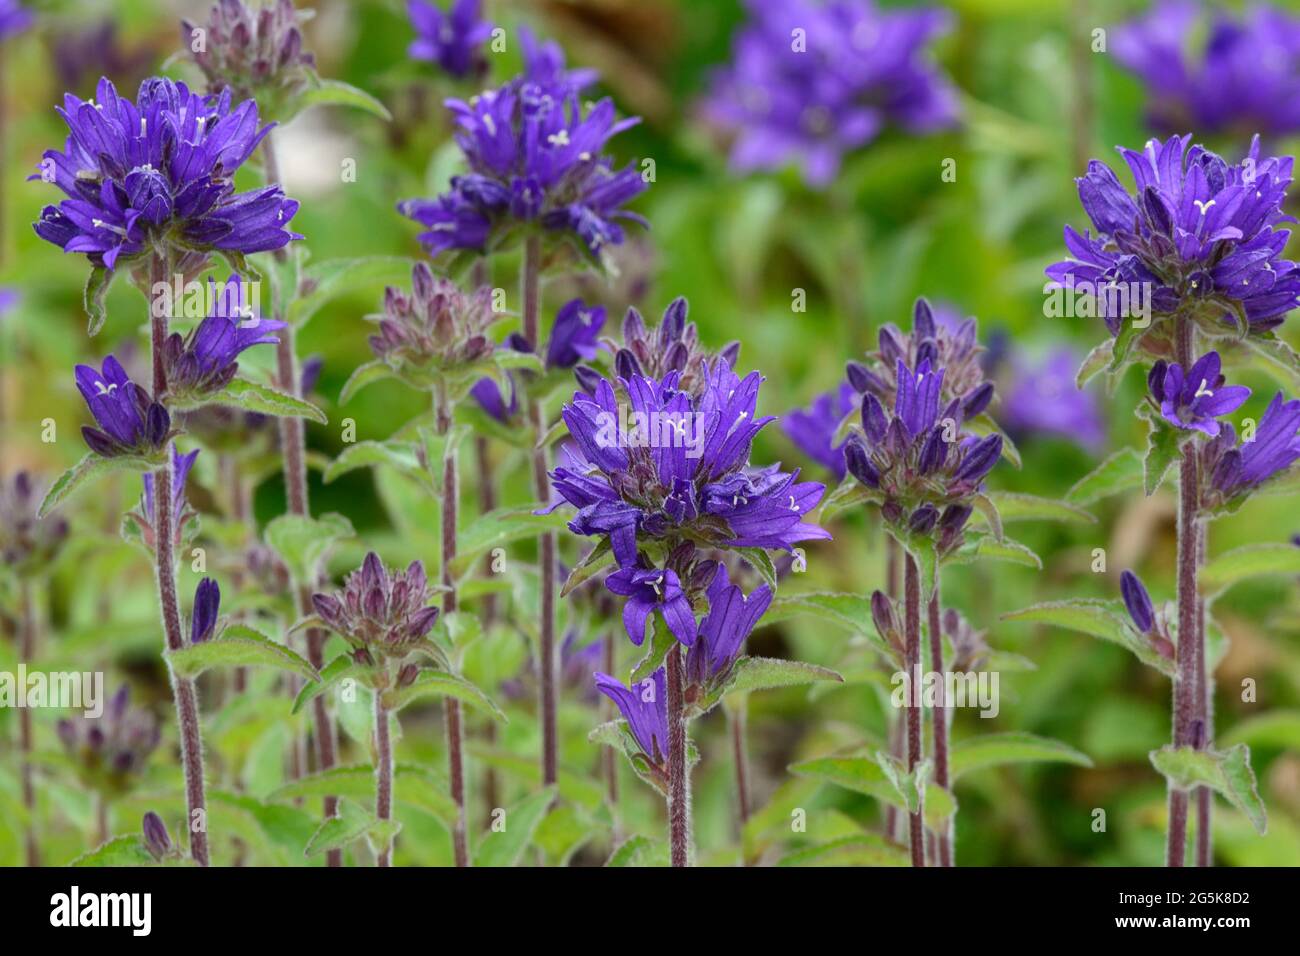 Campanula glomerata or Clustered Bell Flowers Stock Photo